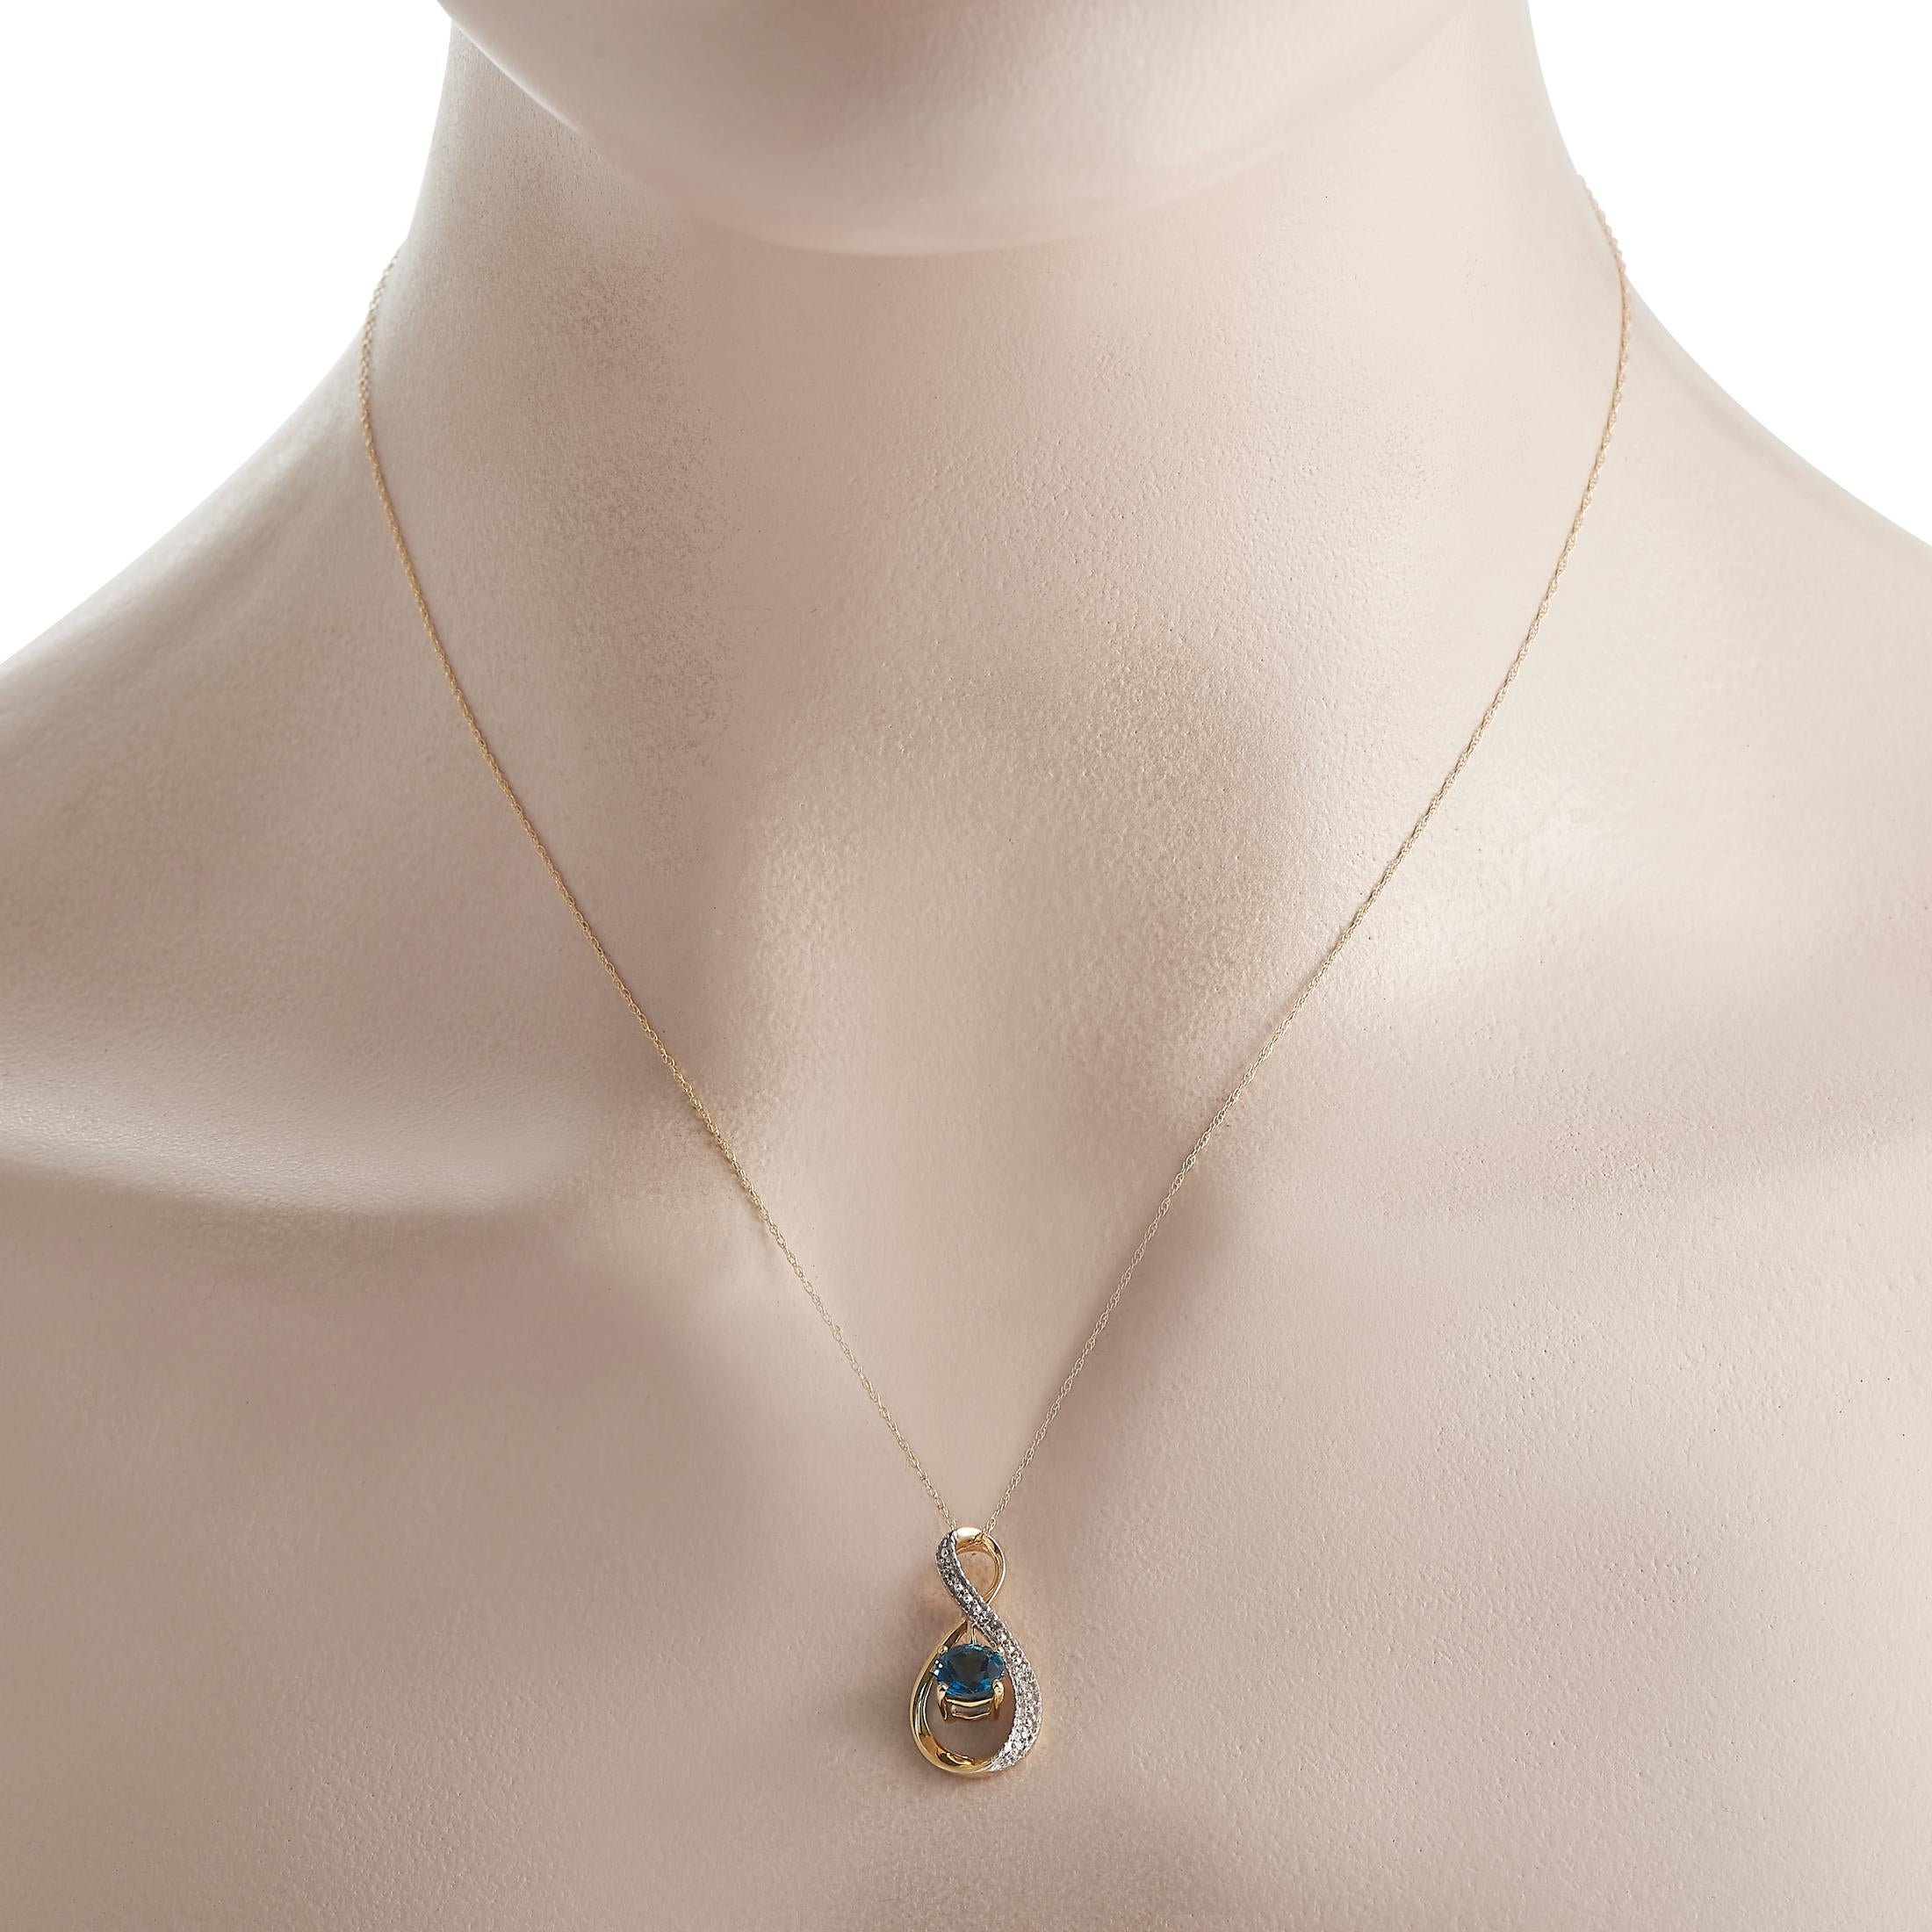 An alluring jewelry gift for a December-born or a December anniversary. This LB Exclusive necklace in 14K yellow gold features a stylized infinity pendant decorated with a wavy row of round diamonds and a beautiful blue topaz gemstone. The double